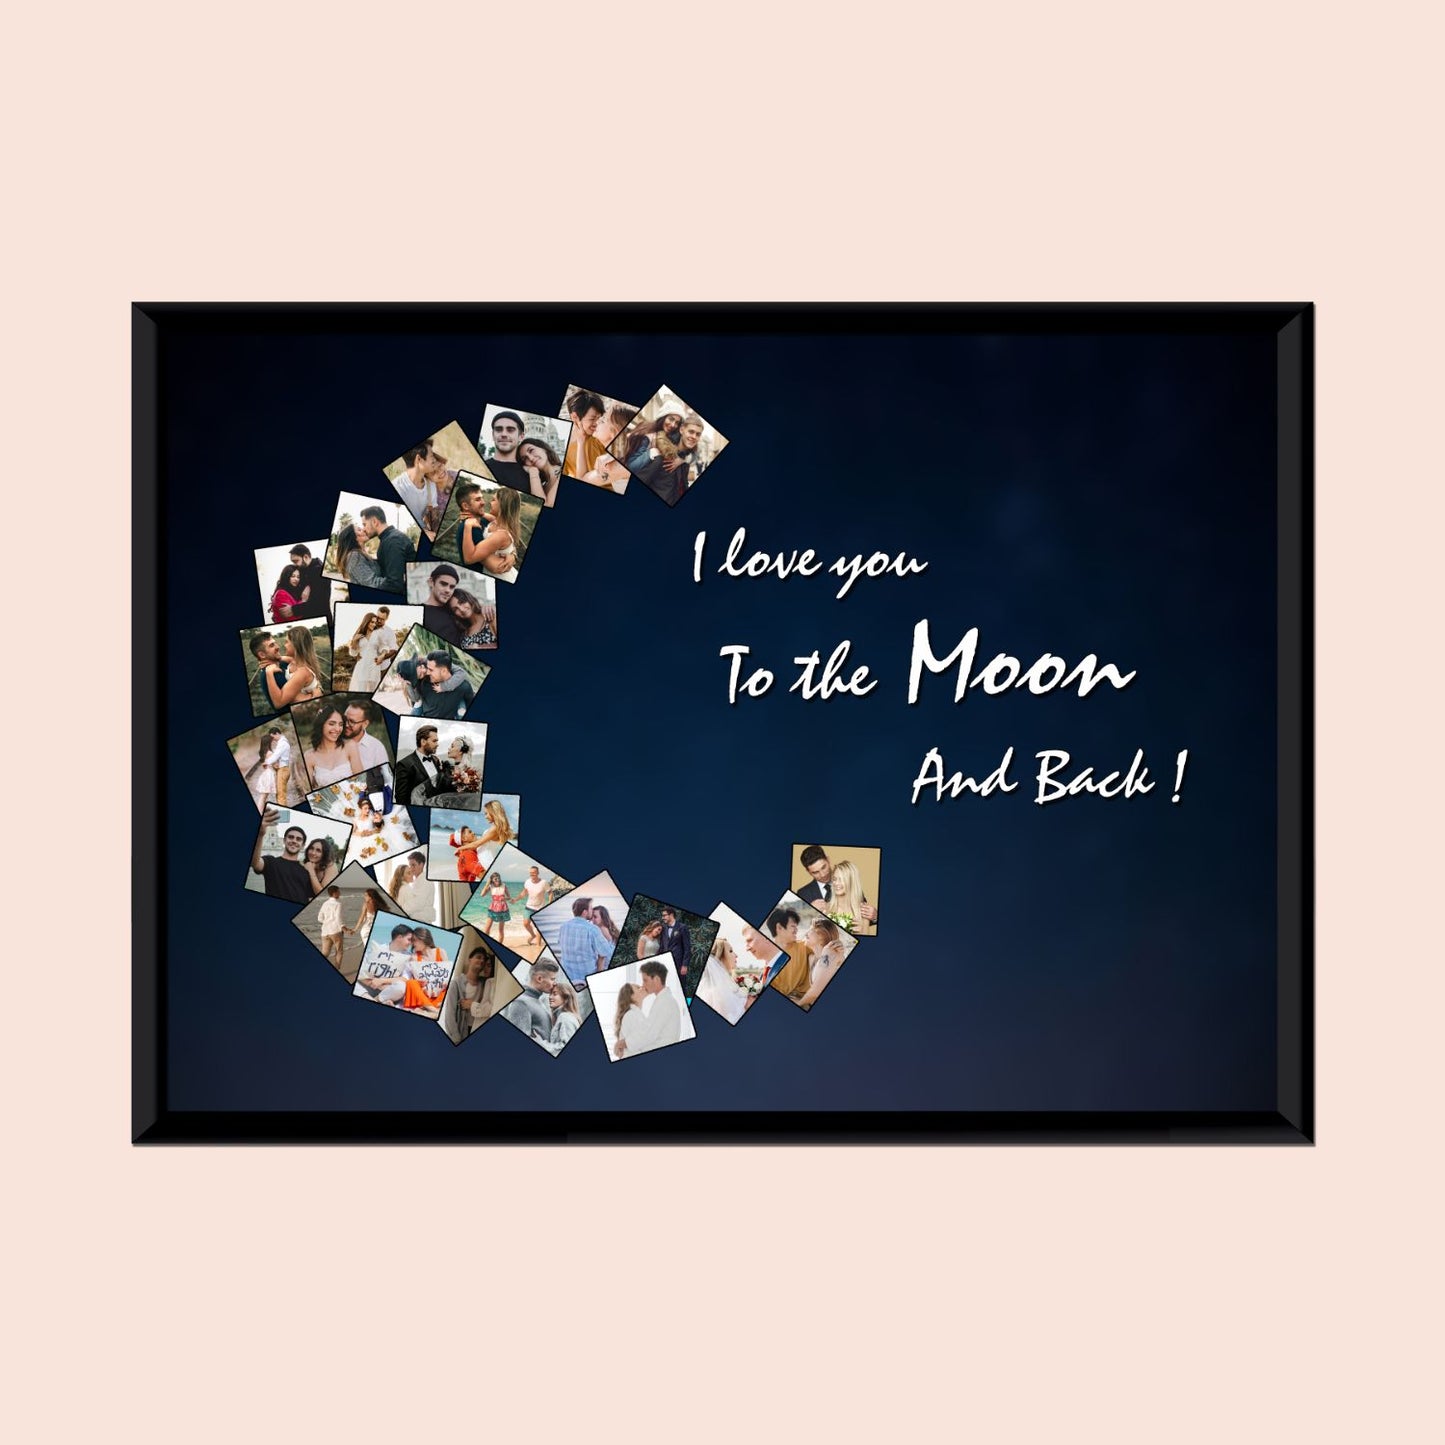 I love you to the Moon and Back Frame